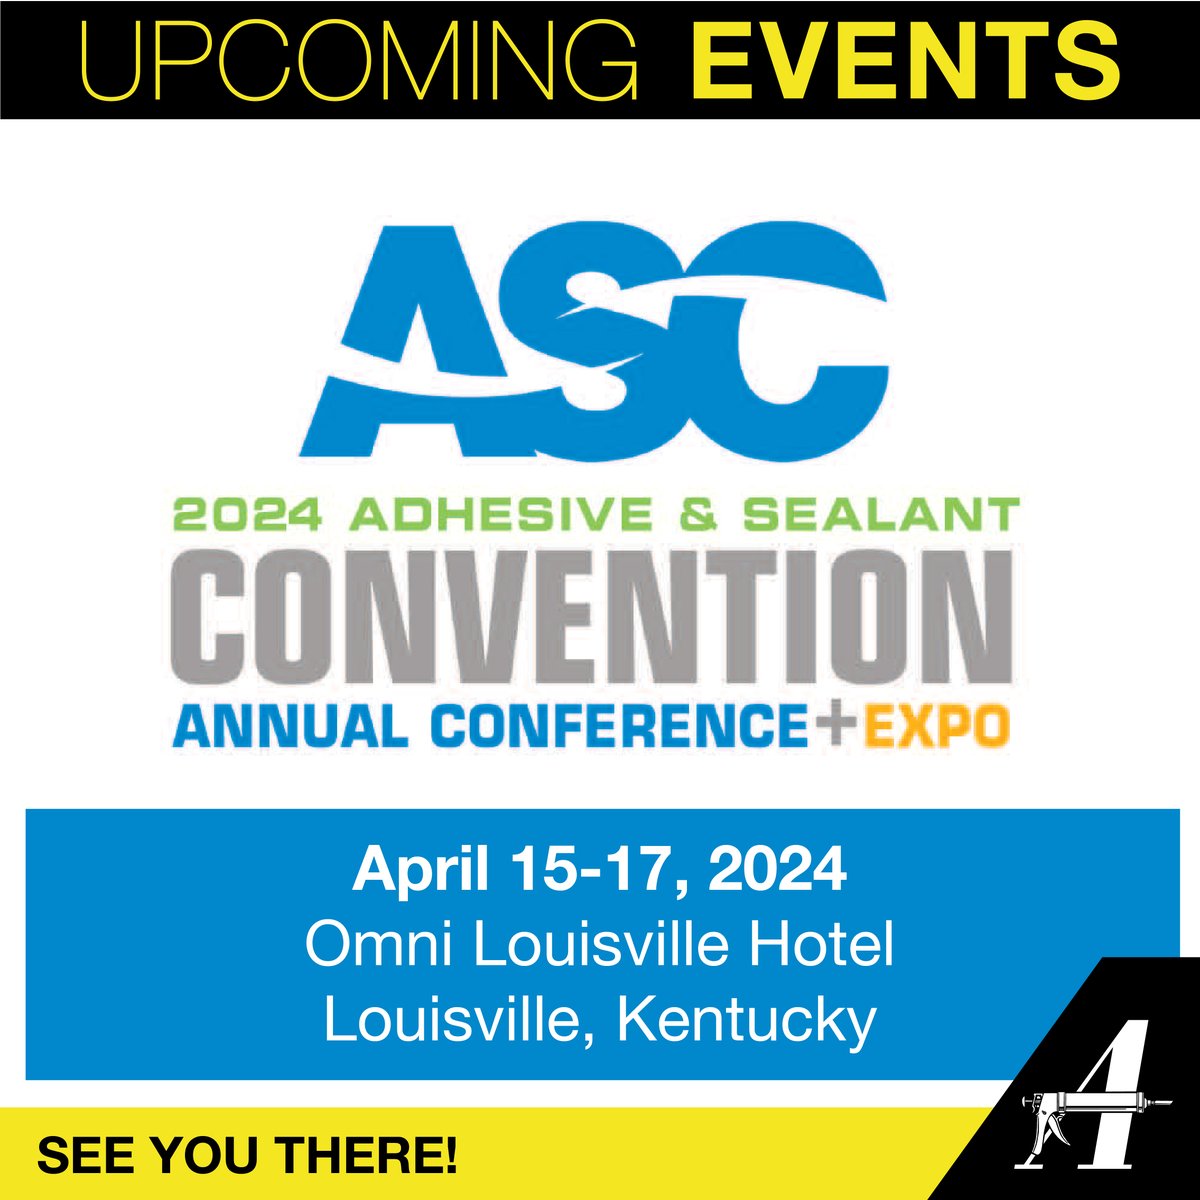 Join us next week at 2024 ASC Annual Convention & EXPO, the LARGEST gathering of adhesive and sealant professionals in the US.  Be sure to stop by our booth# 200.

#ASCoucil #ASC2024 #tradeshow #sealant #adhesive #engineer #toolsofthetrade #albioneng